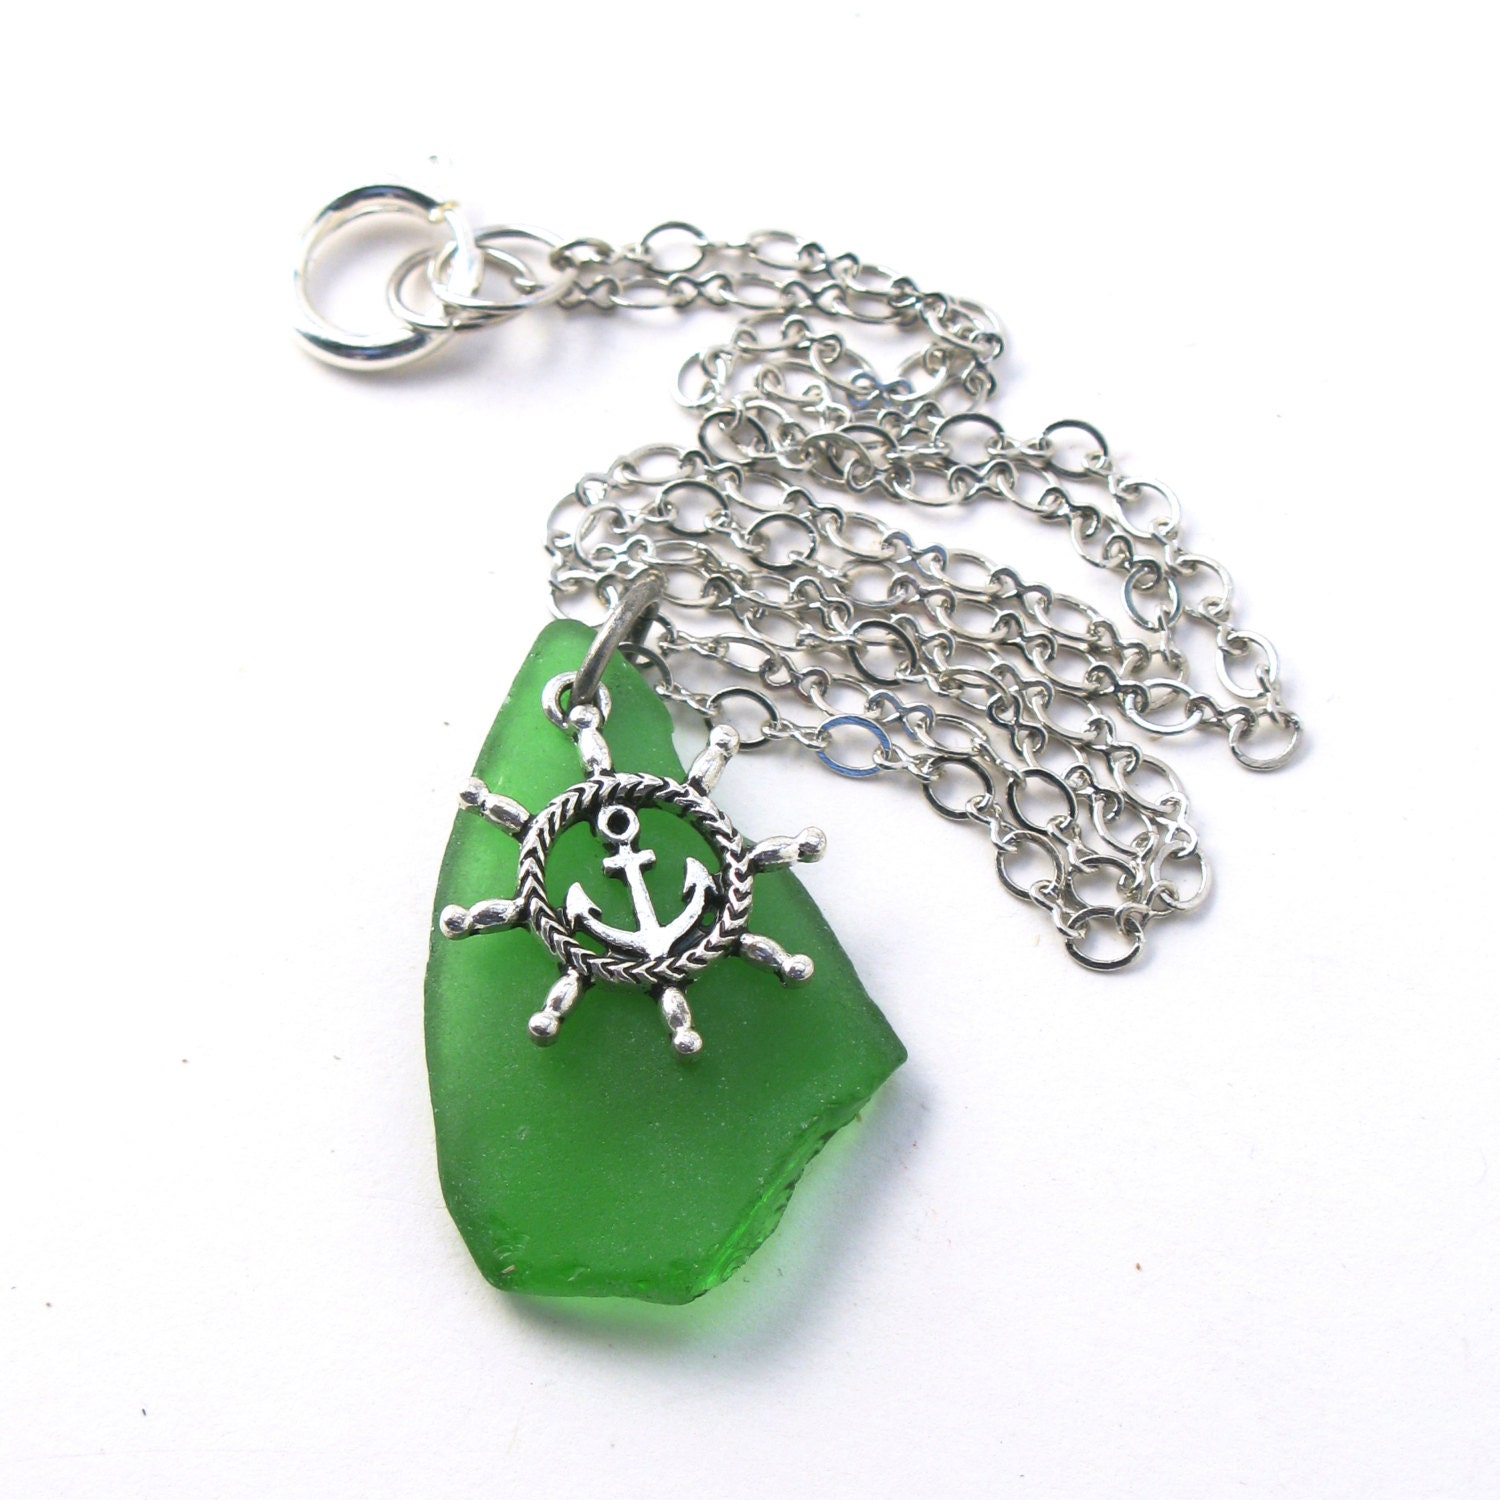 Kelly Green Sea Glass on a Silver Chain Necklace with an Anchor Charm